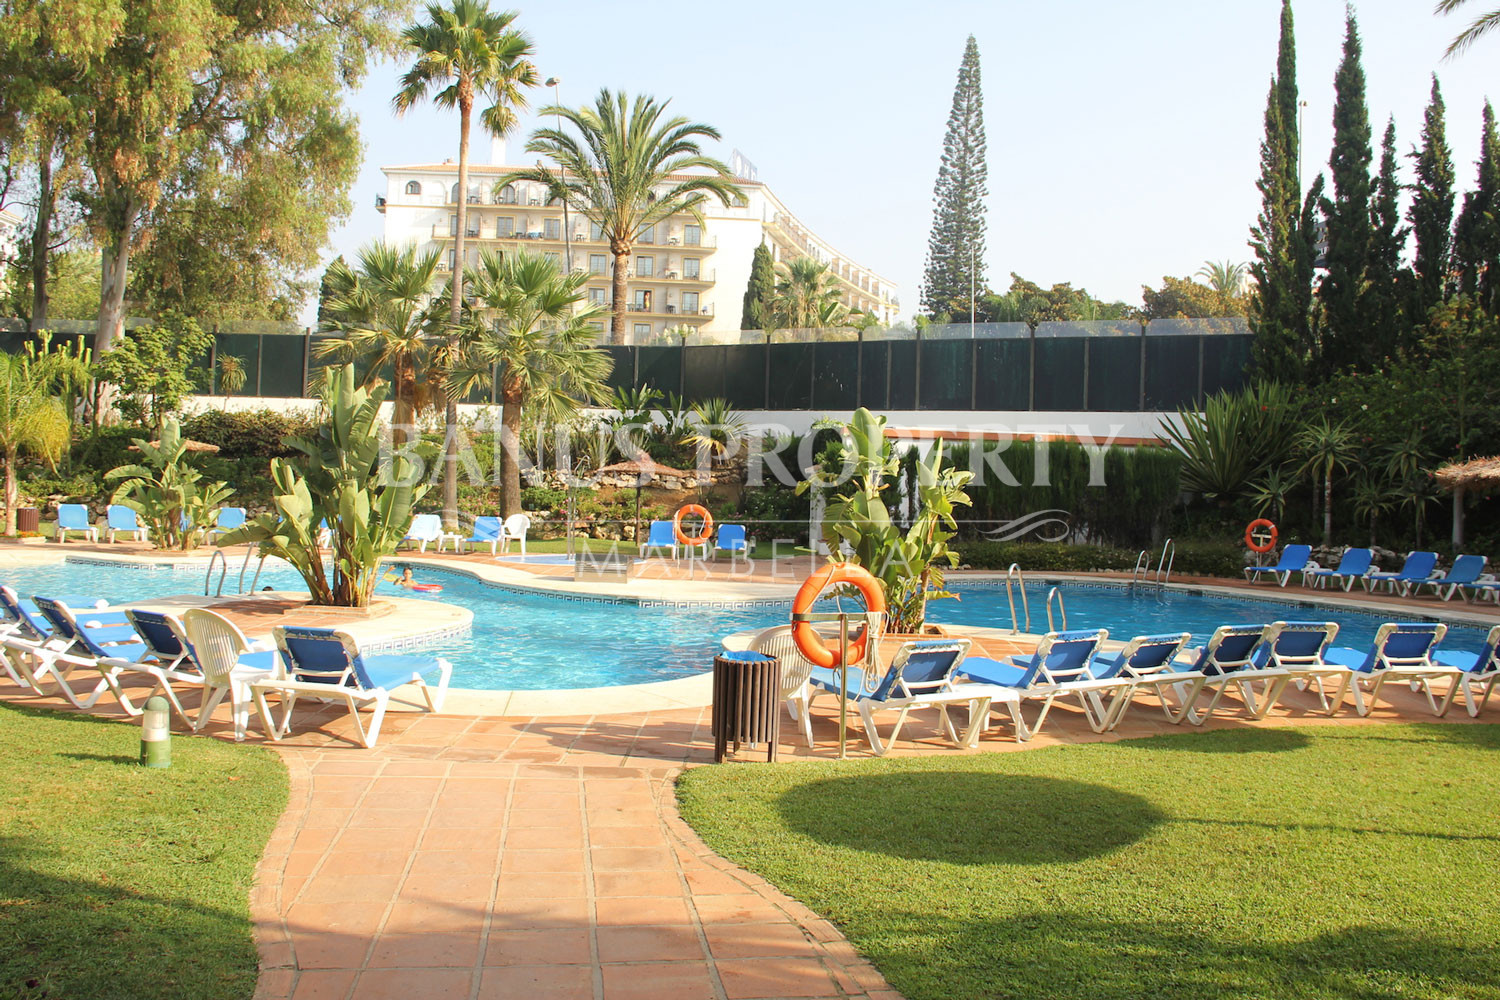 Superb three-bedroom penthouse with spectacular sea views for sale in Medina Garden, Puerto Banús